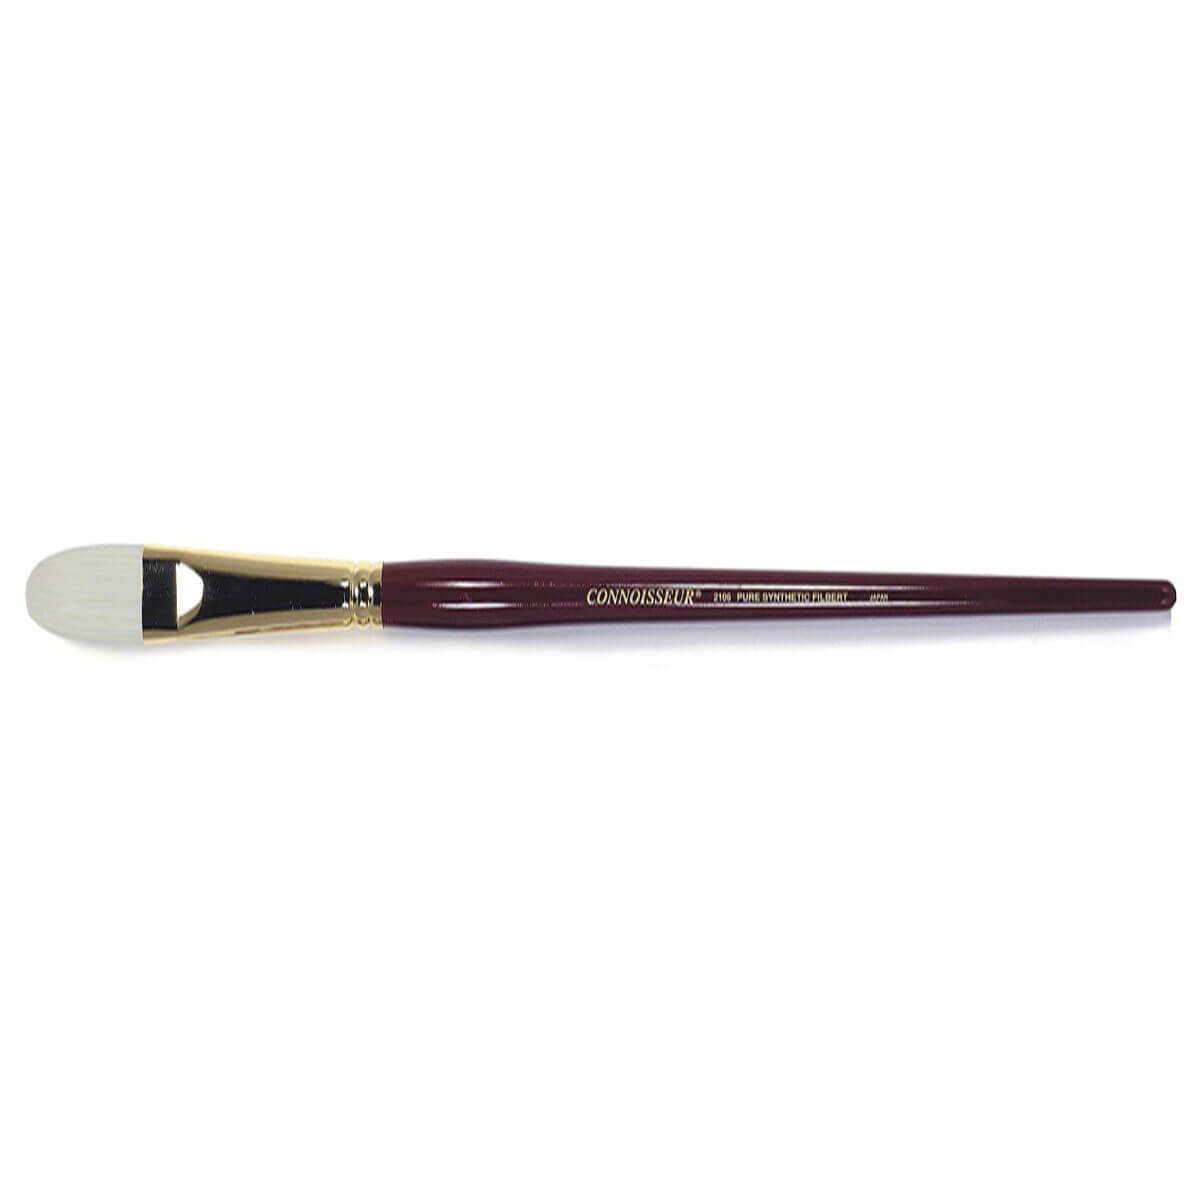 Connoisseur Pure Synthetic Brush Filbert No12